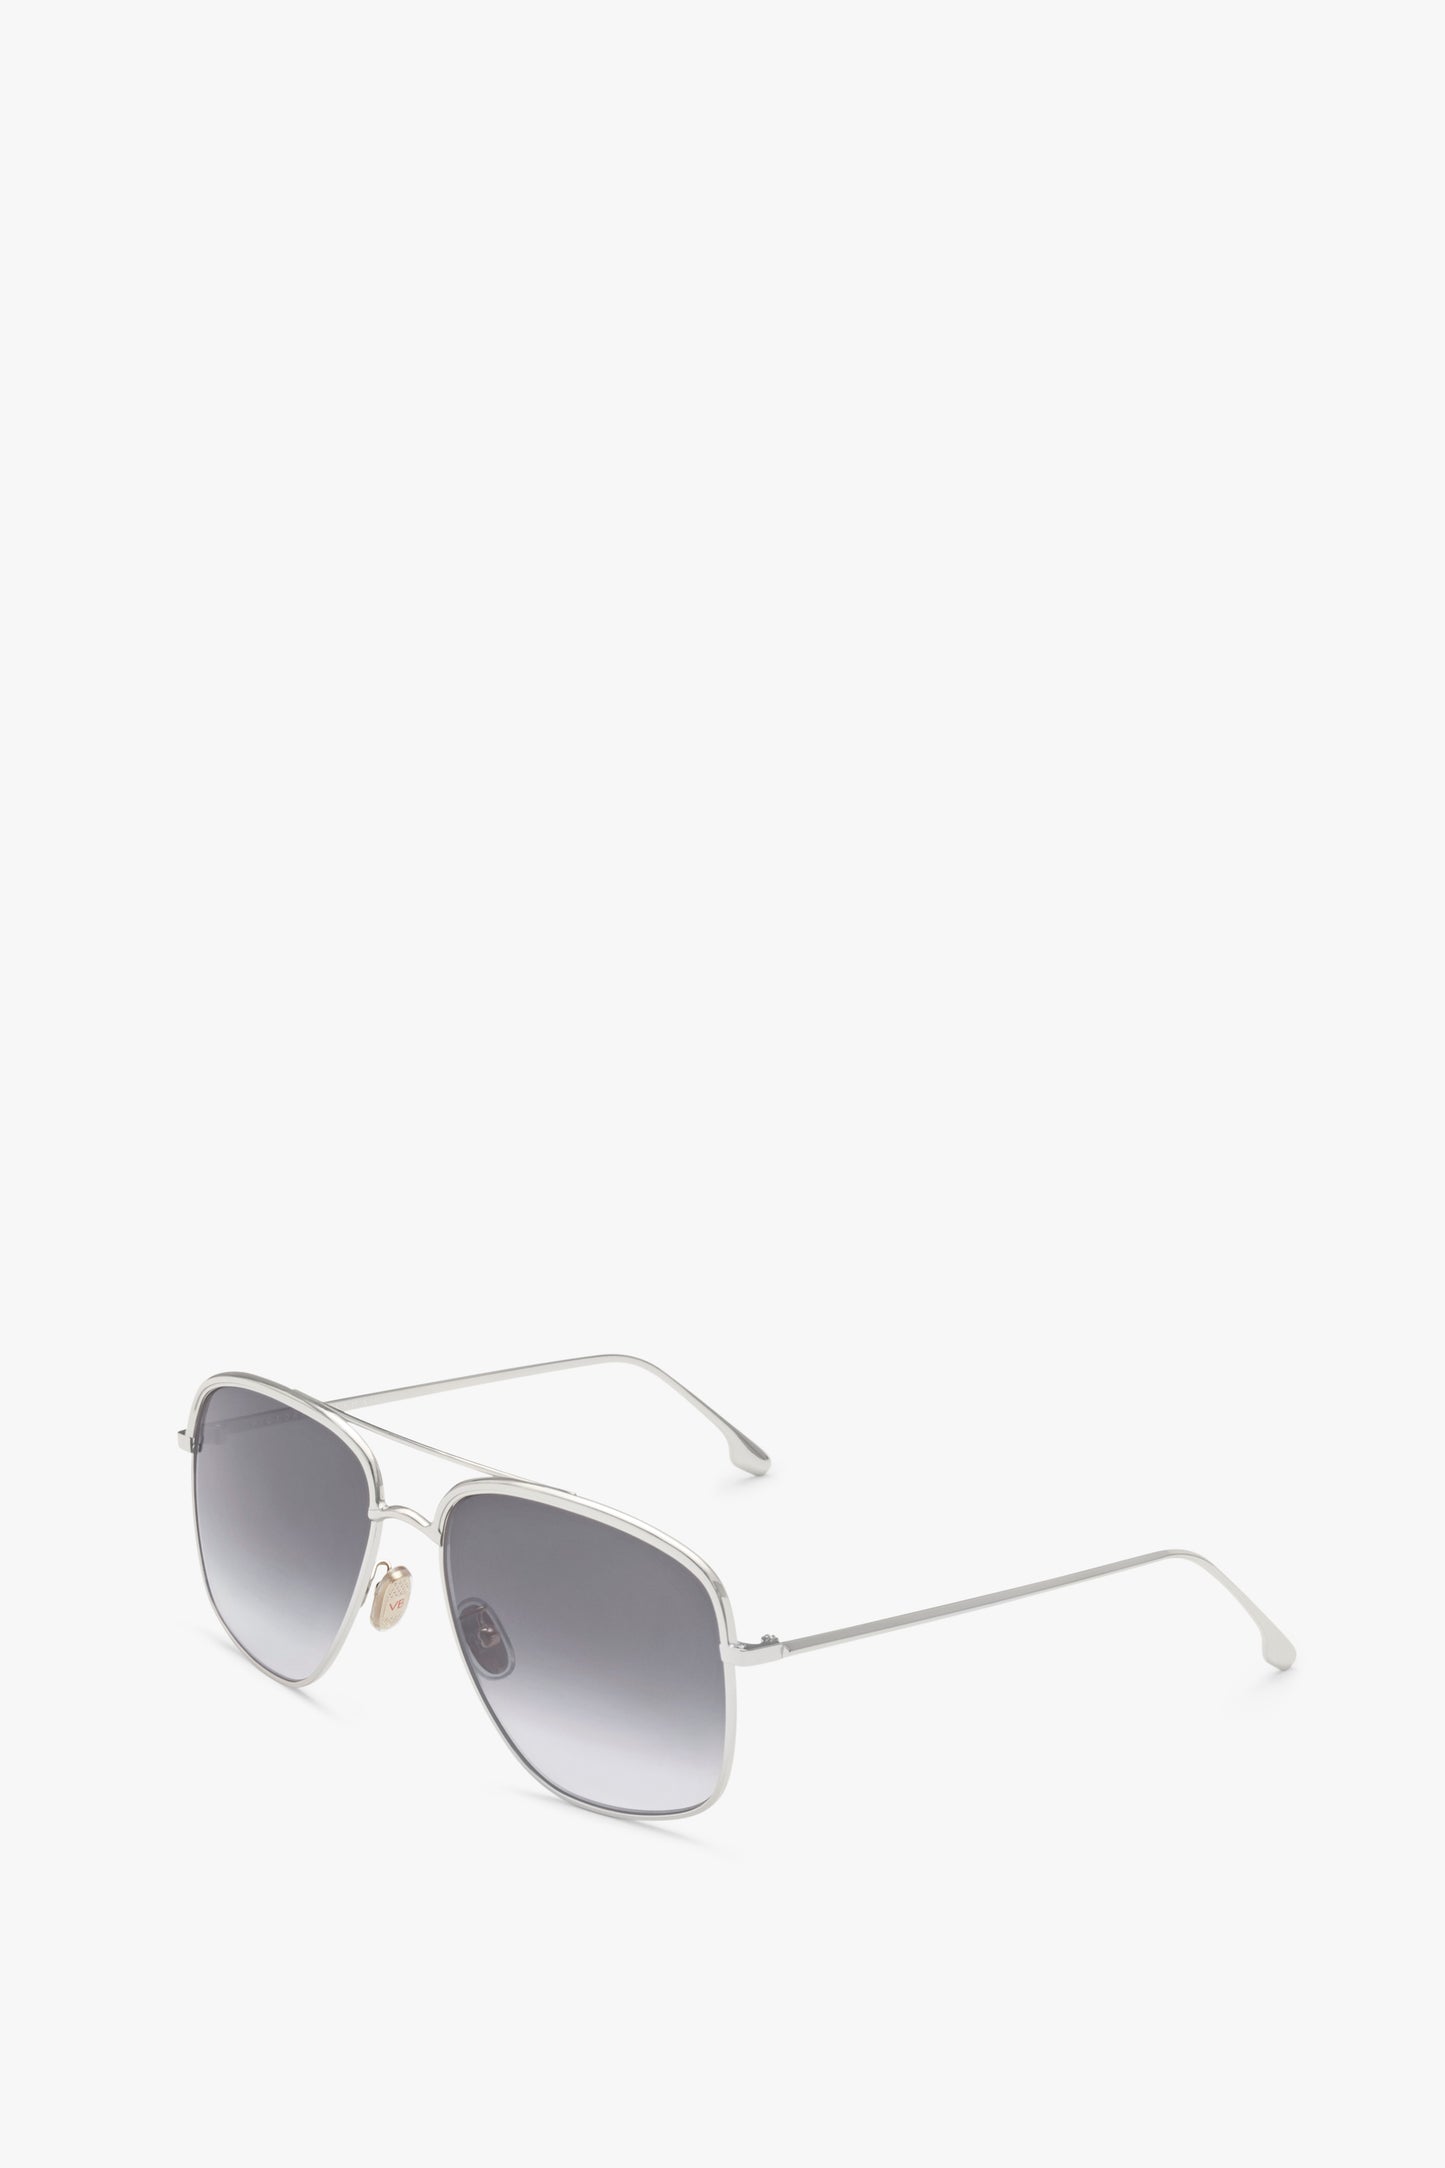 A pair of handcrafted in Italy, silver-framed, rectangular sunglasses with dark tinted Zeiss lenses and thin arms, placed against a plain white background. 

Replacement:
A pair of Double Brow Navigator in Silver by Victoria Beckham, silver-framed, rectangular sunglasses with dark tinted Zeiss lenses and thin arms, placed against a plain white background.